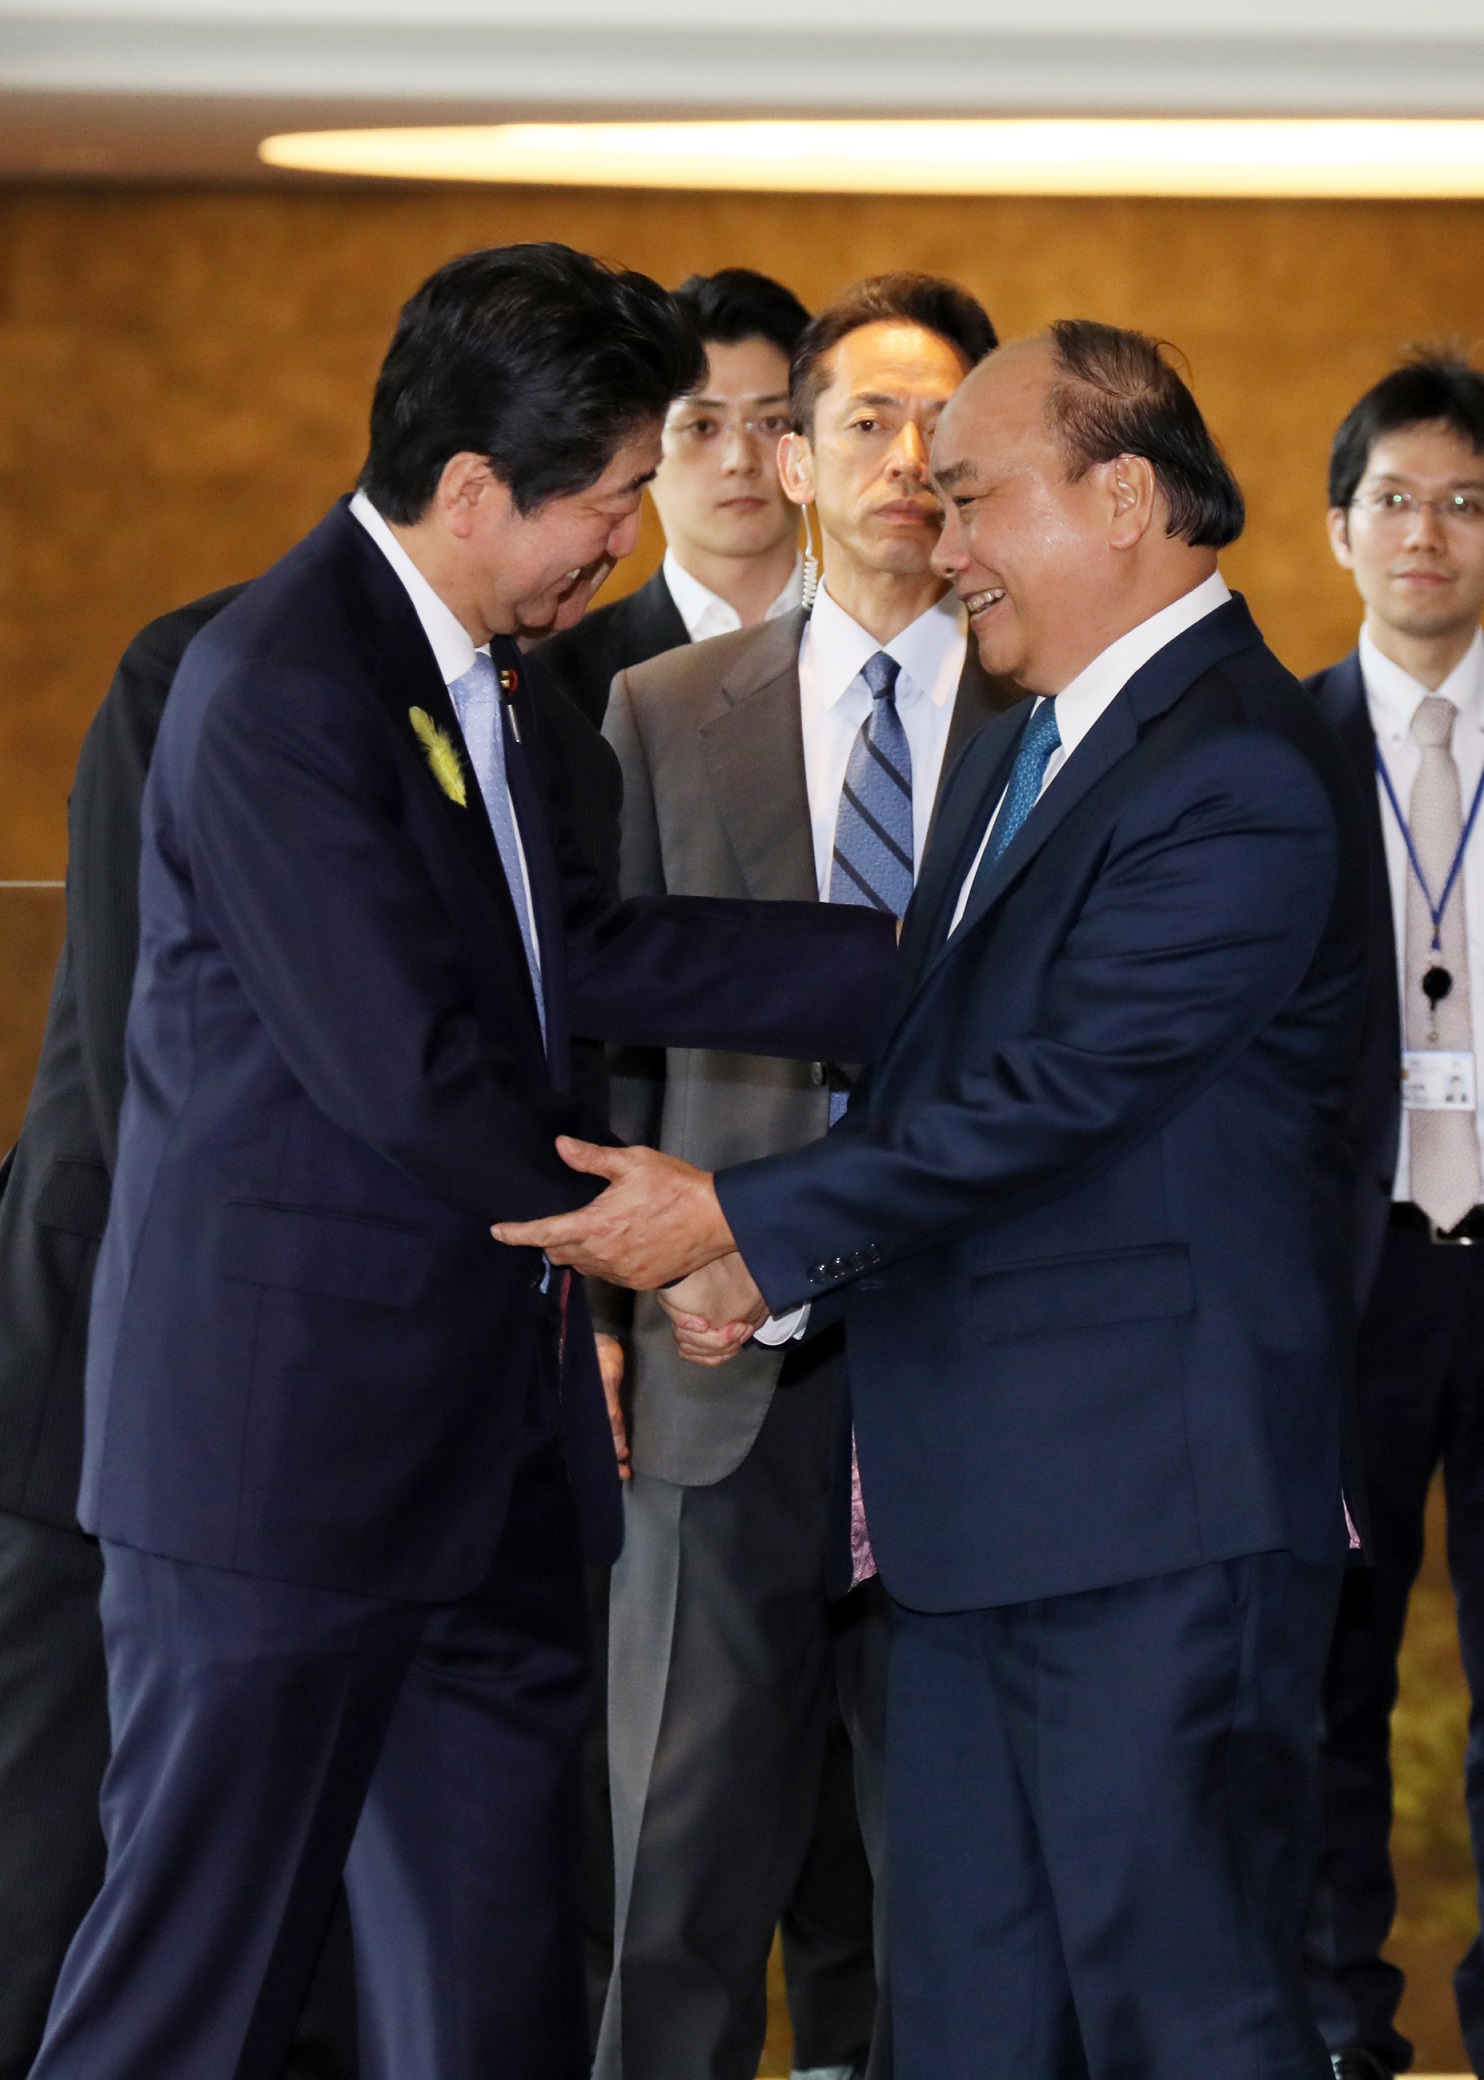 Photograph of the leaders shaking hands (3)